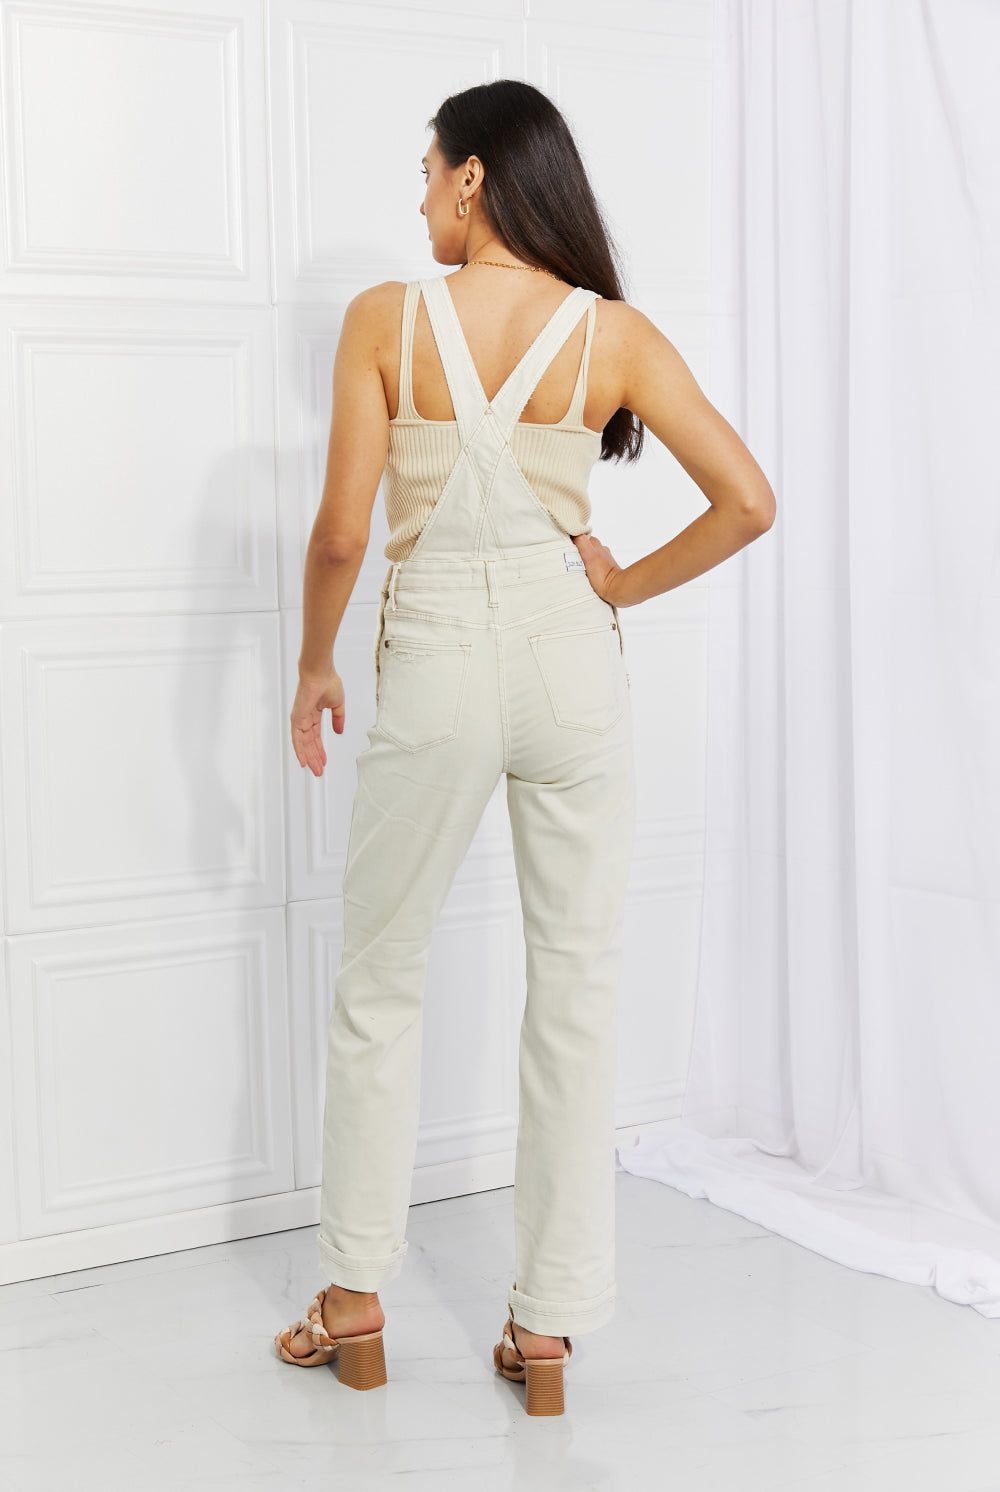 Light Gray White Orchard Judy Blue Full Size Taylor High Waist Overalls Overalls